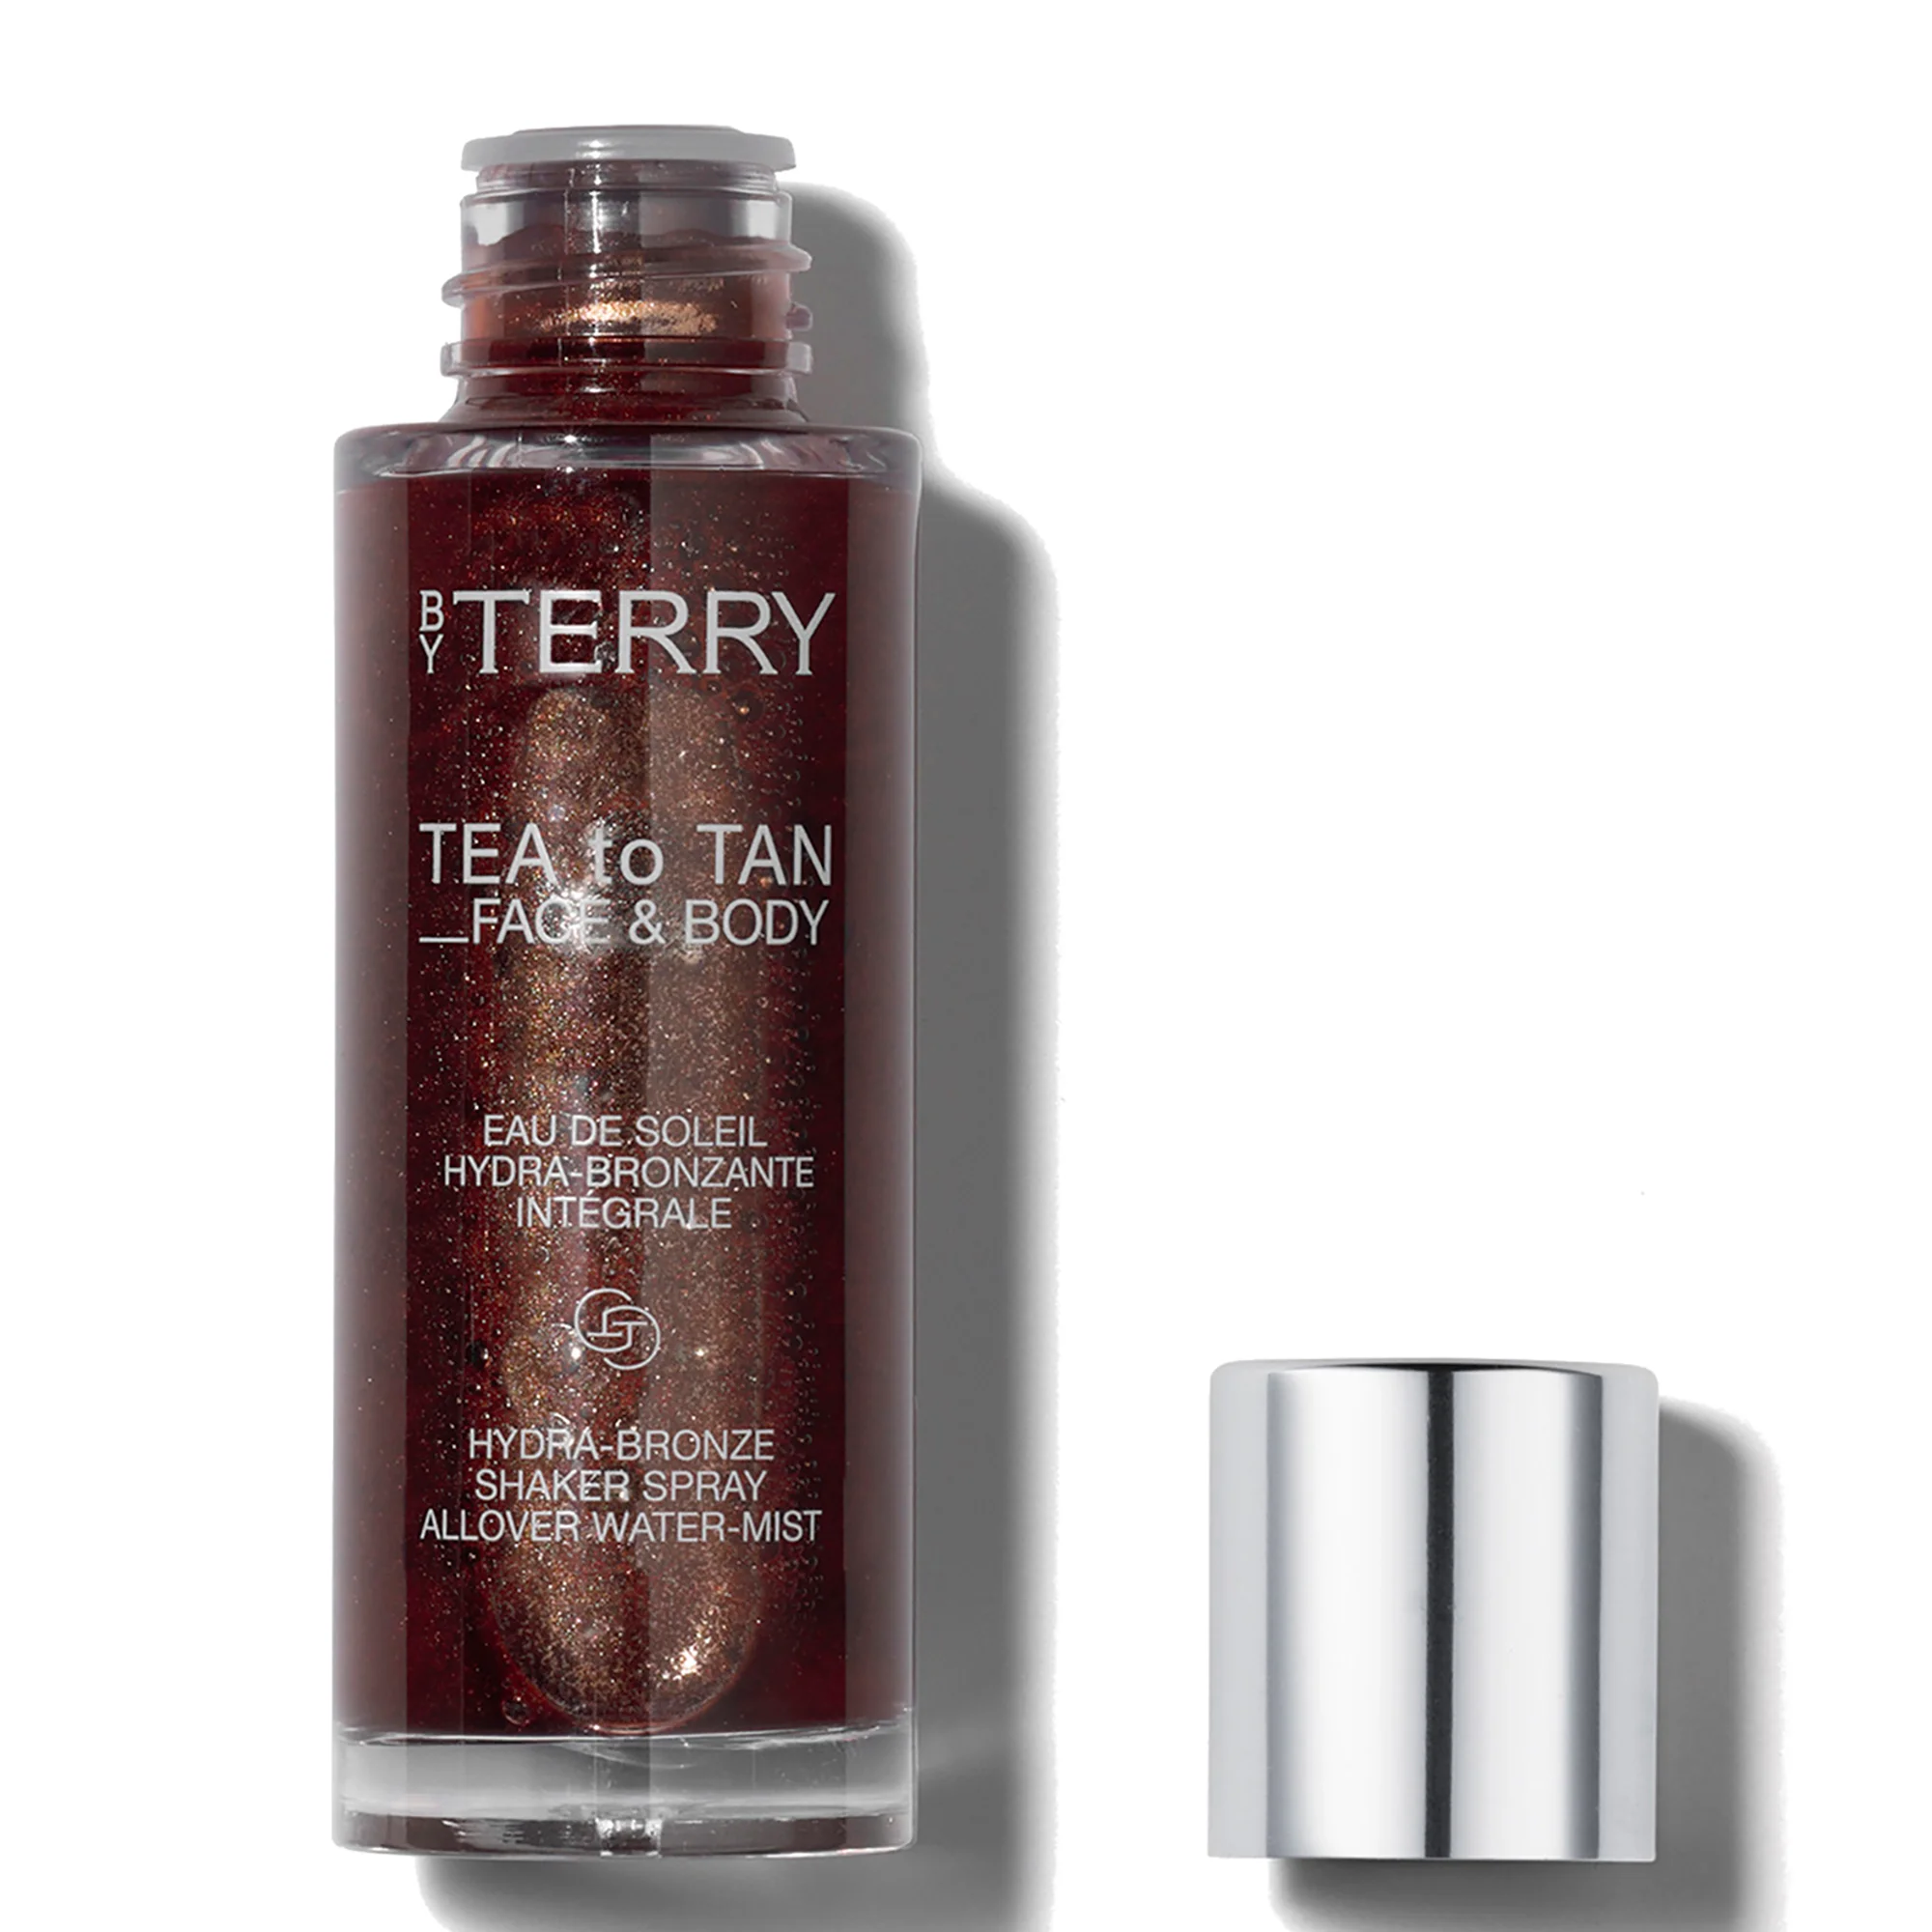 By Terry Tea to Tan Face and Body 30ml Image 1